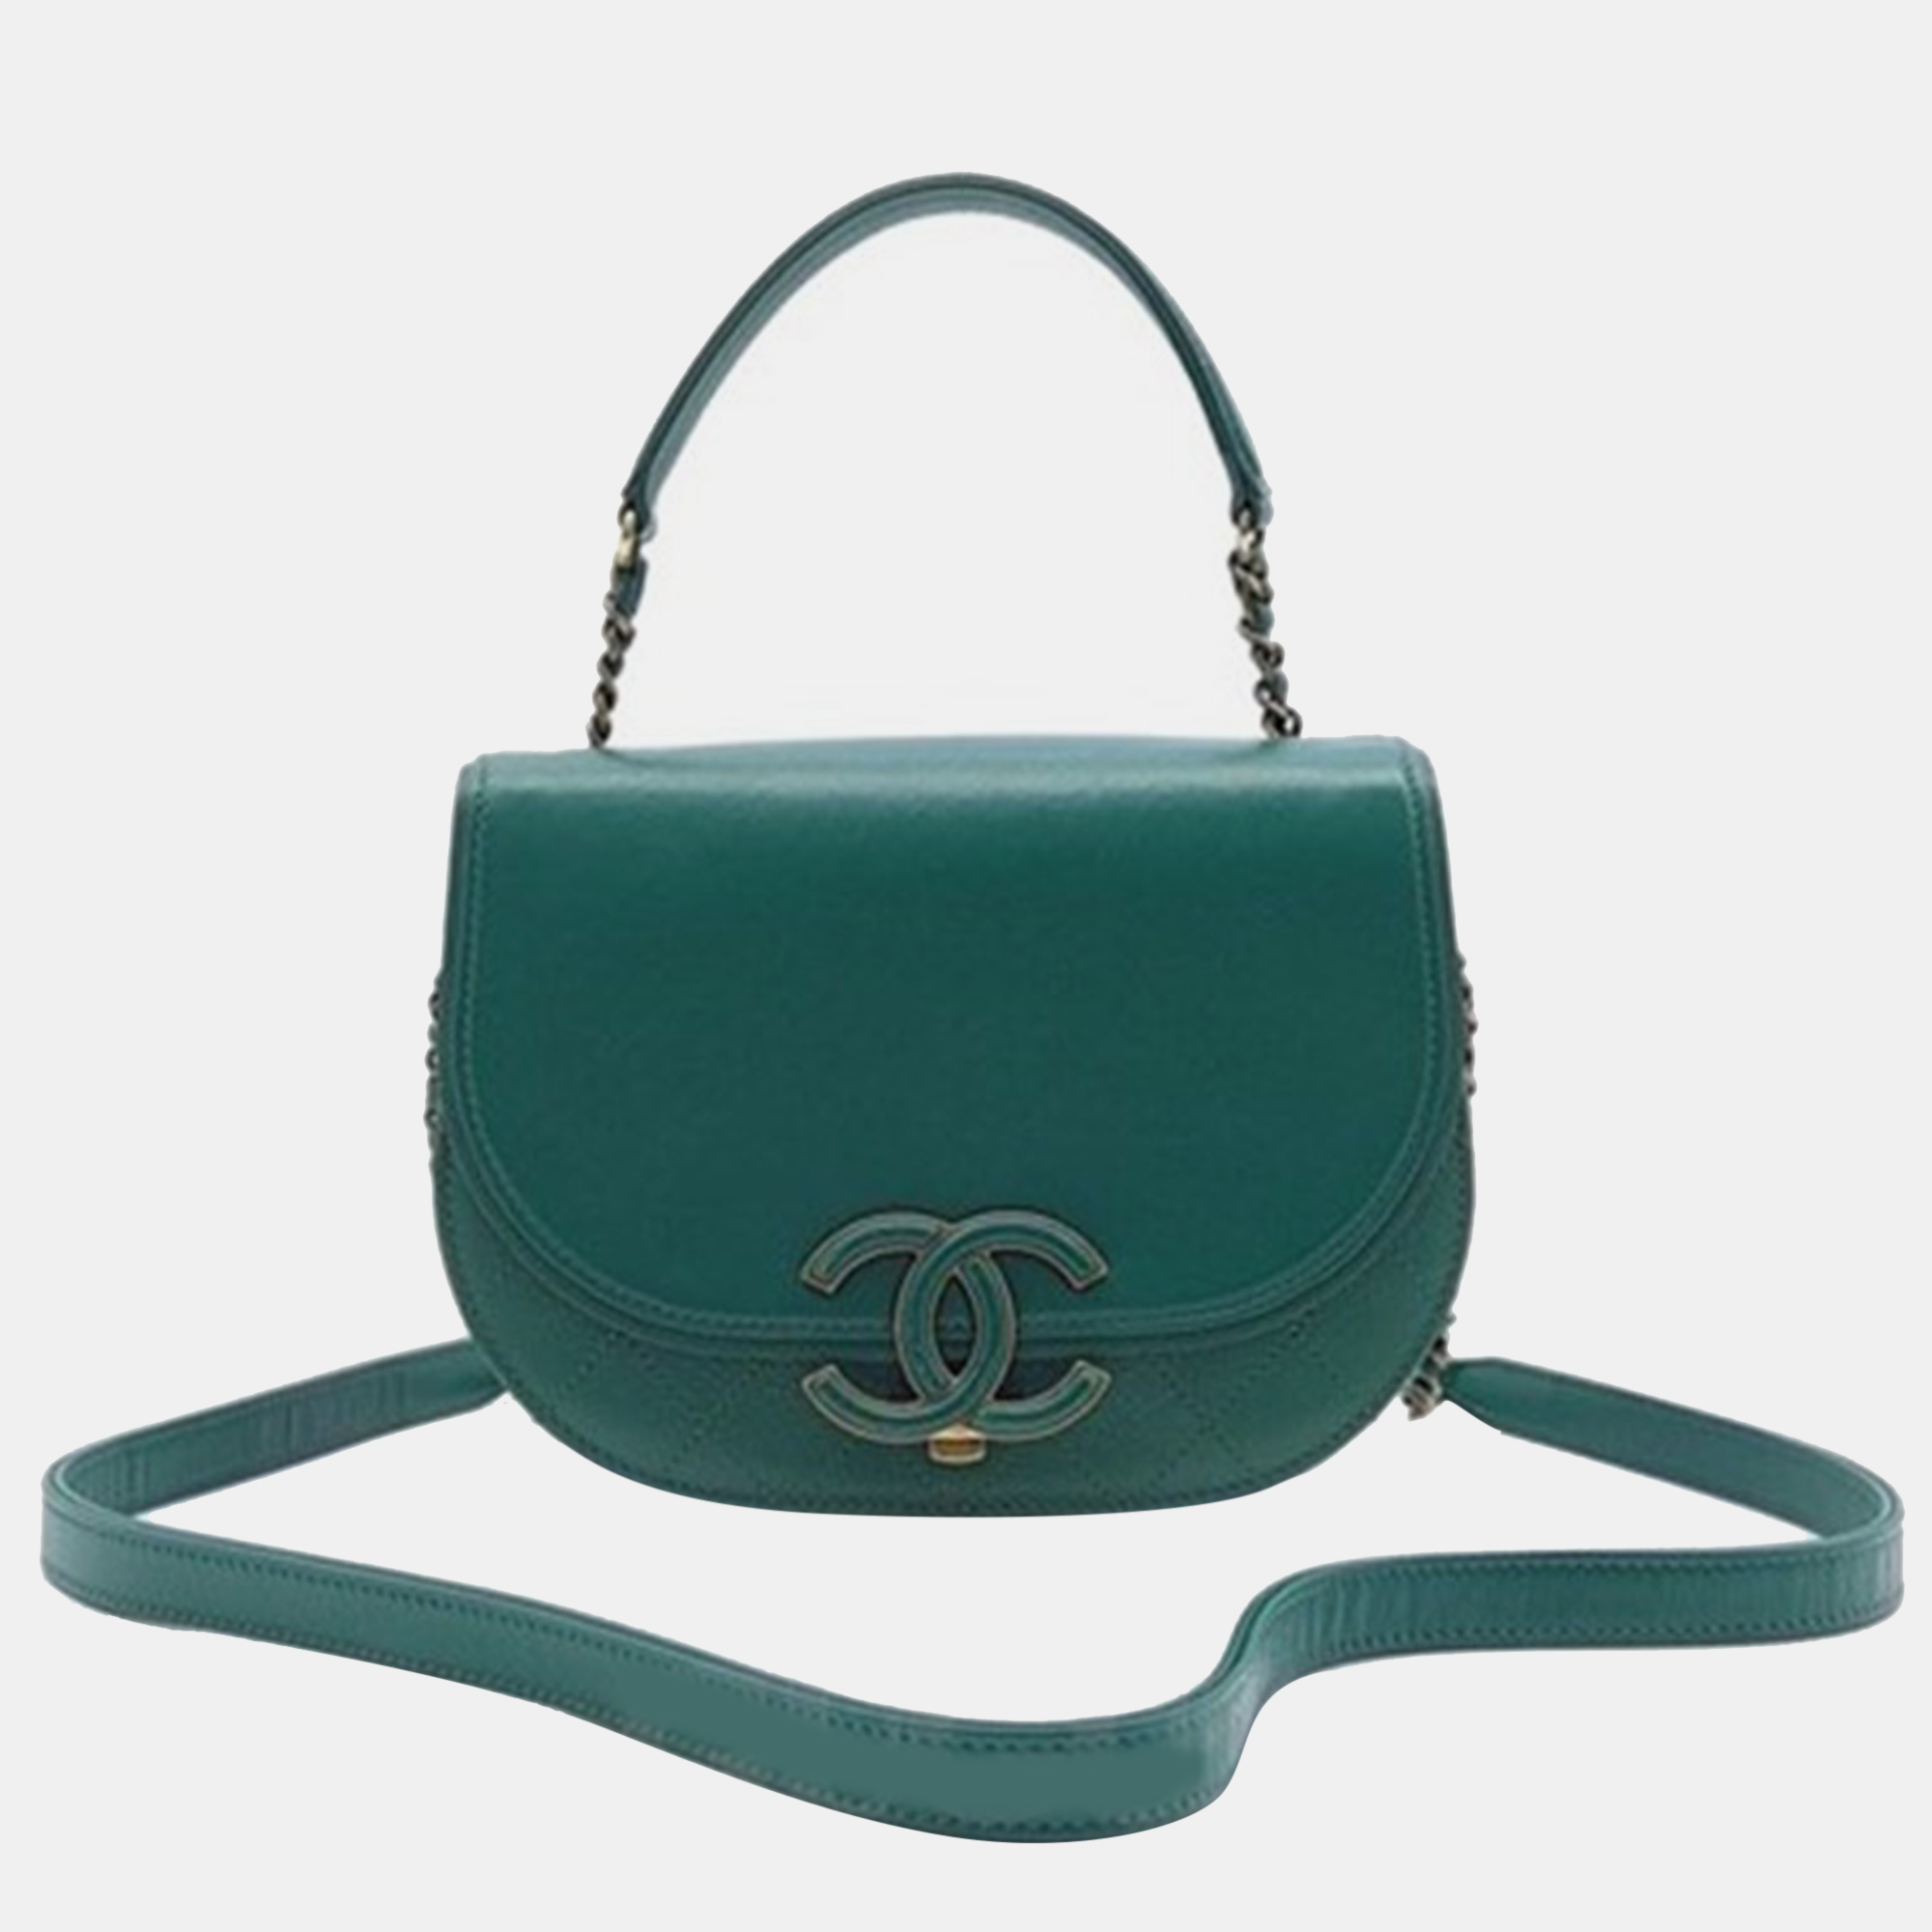 

Chanel Blue Leather Small Coco Curve Flap Bag, Green